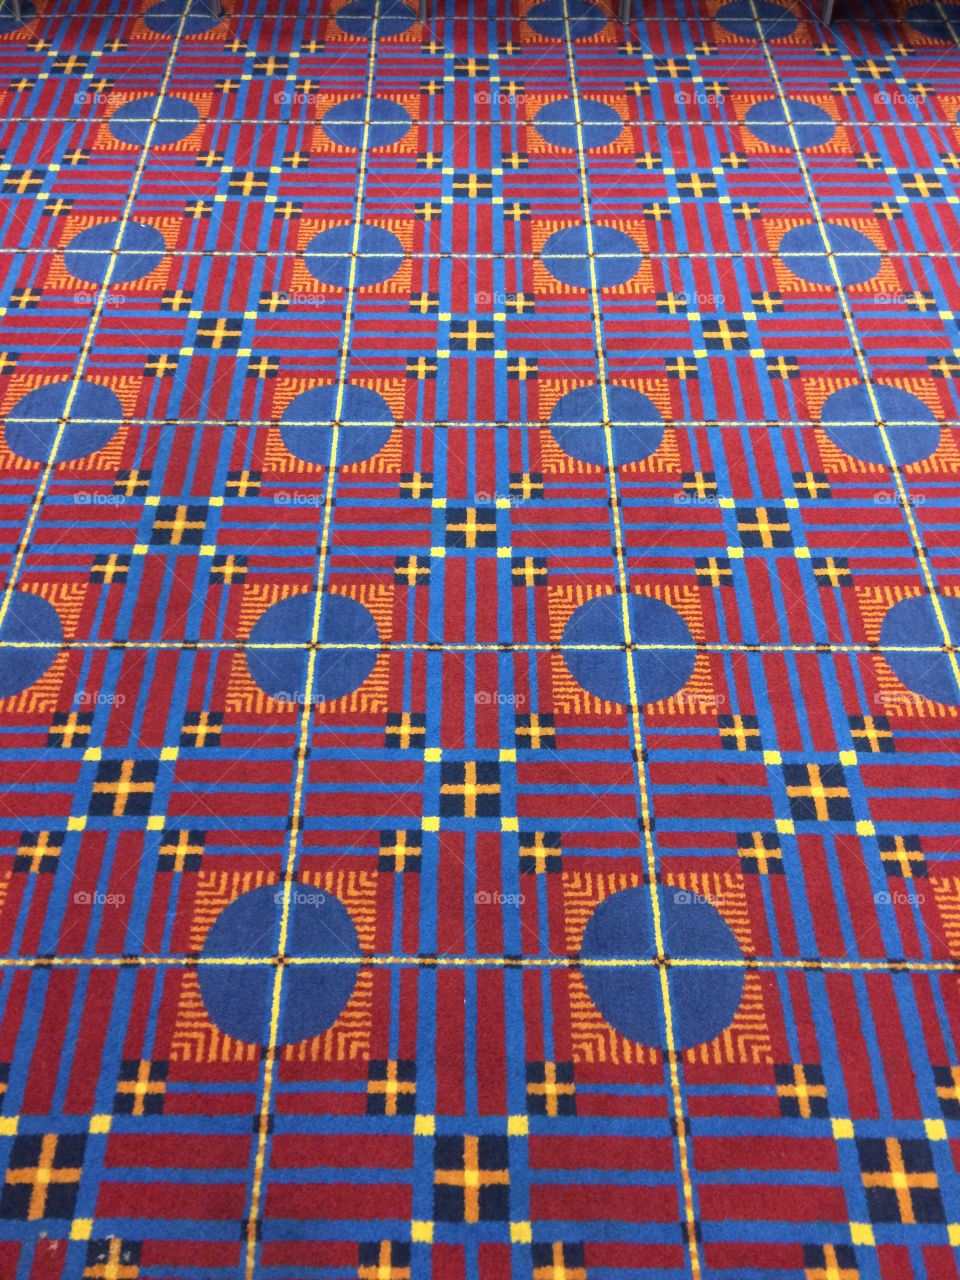 Red. Lue and yellow carpet pattern